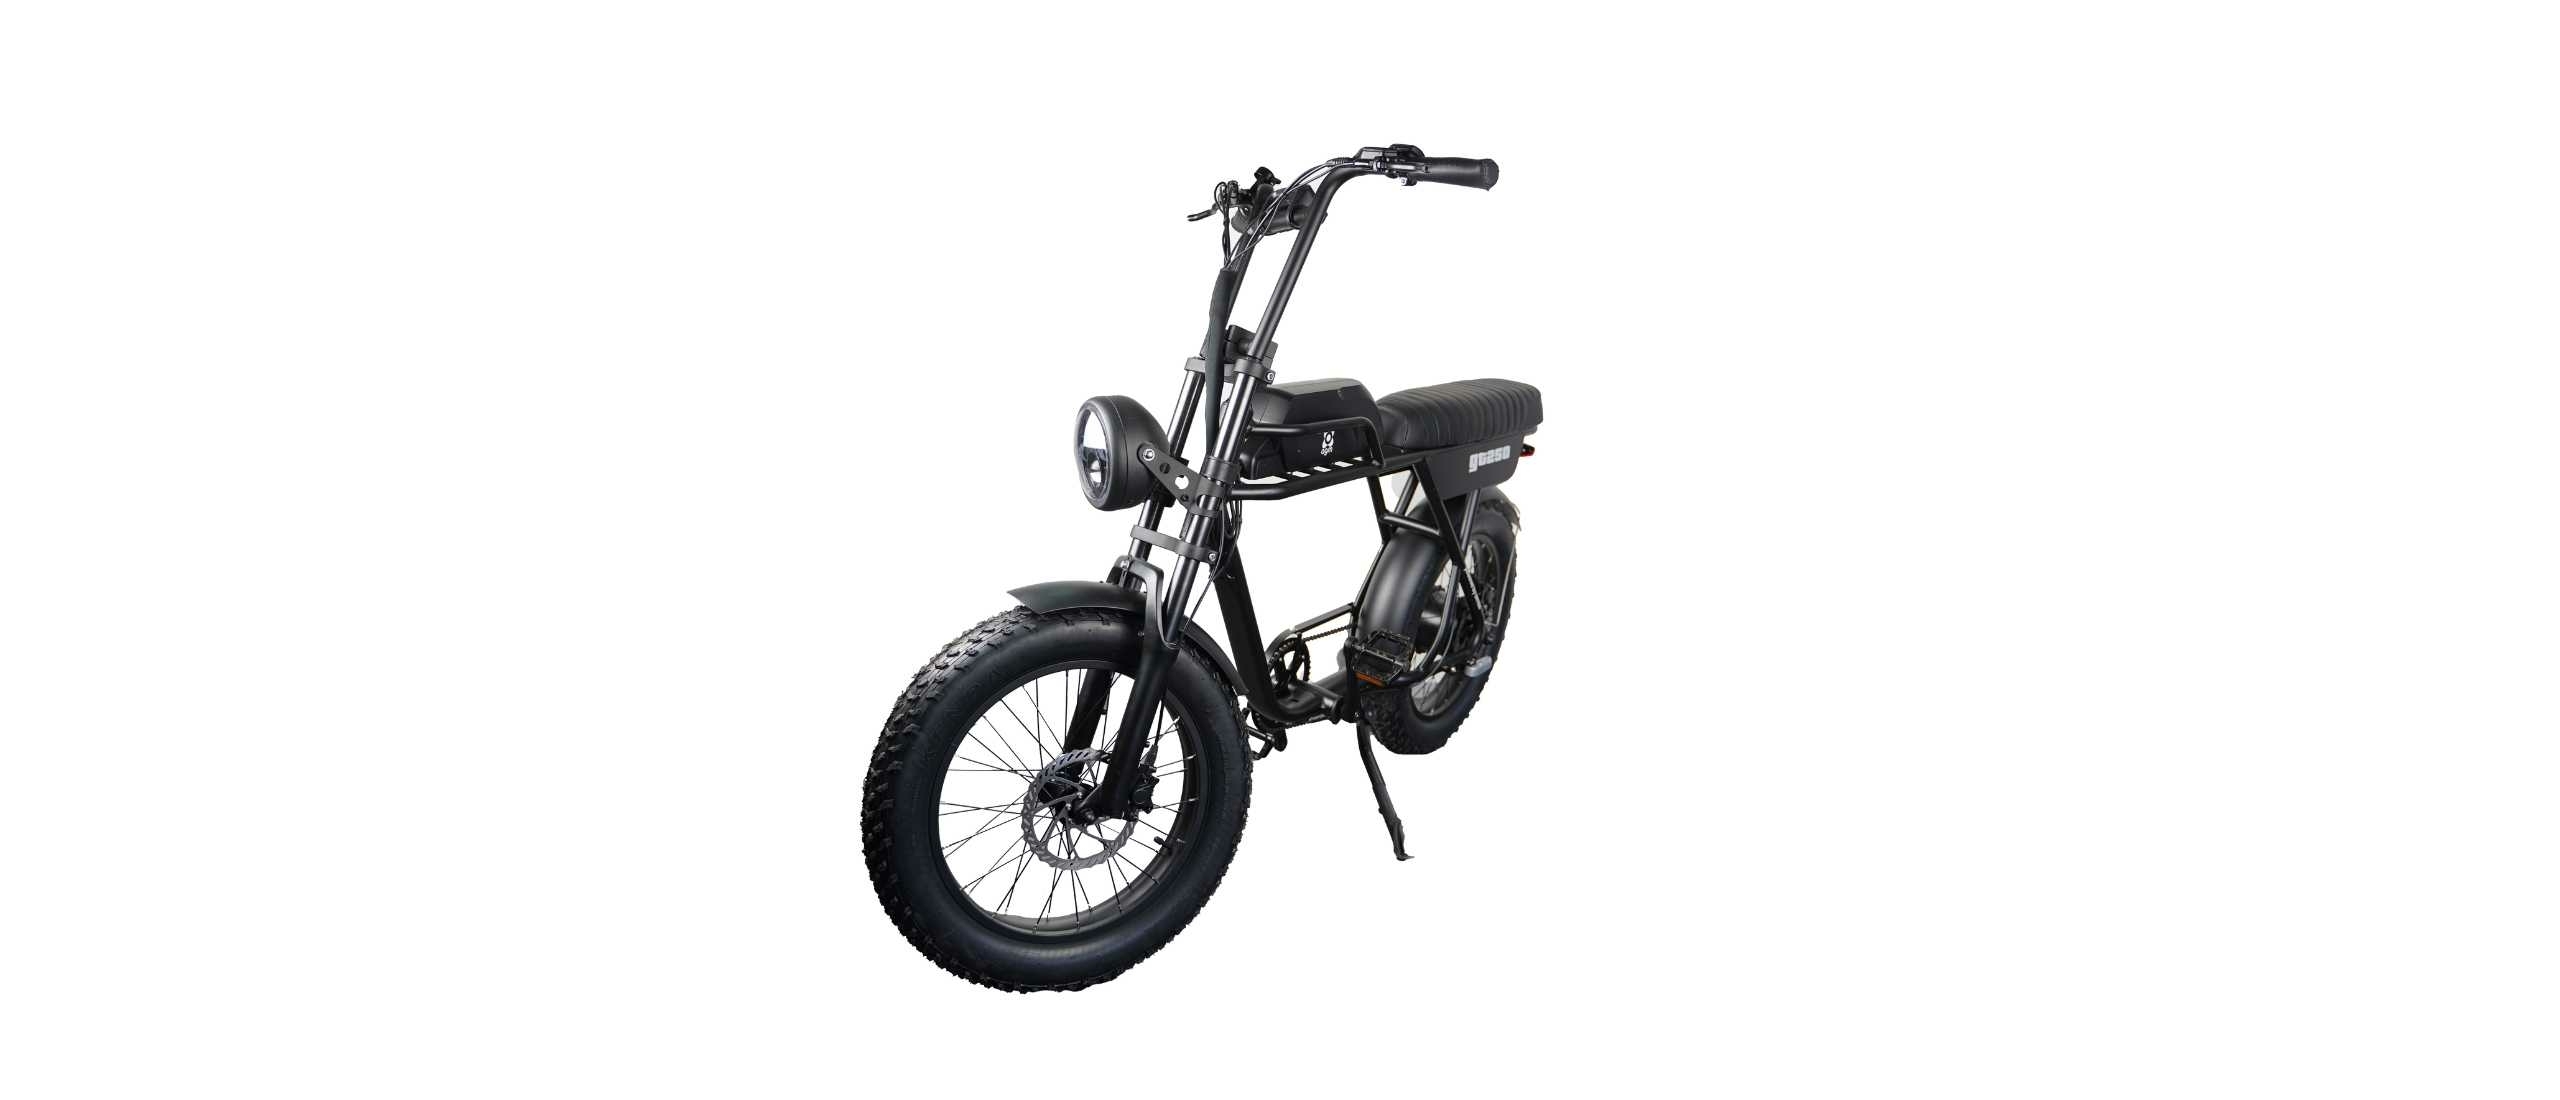 Occasions Fatbikes en E-choppers